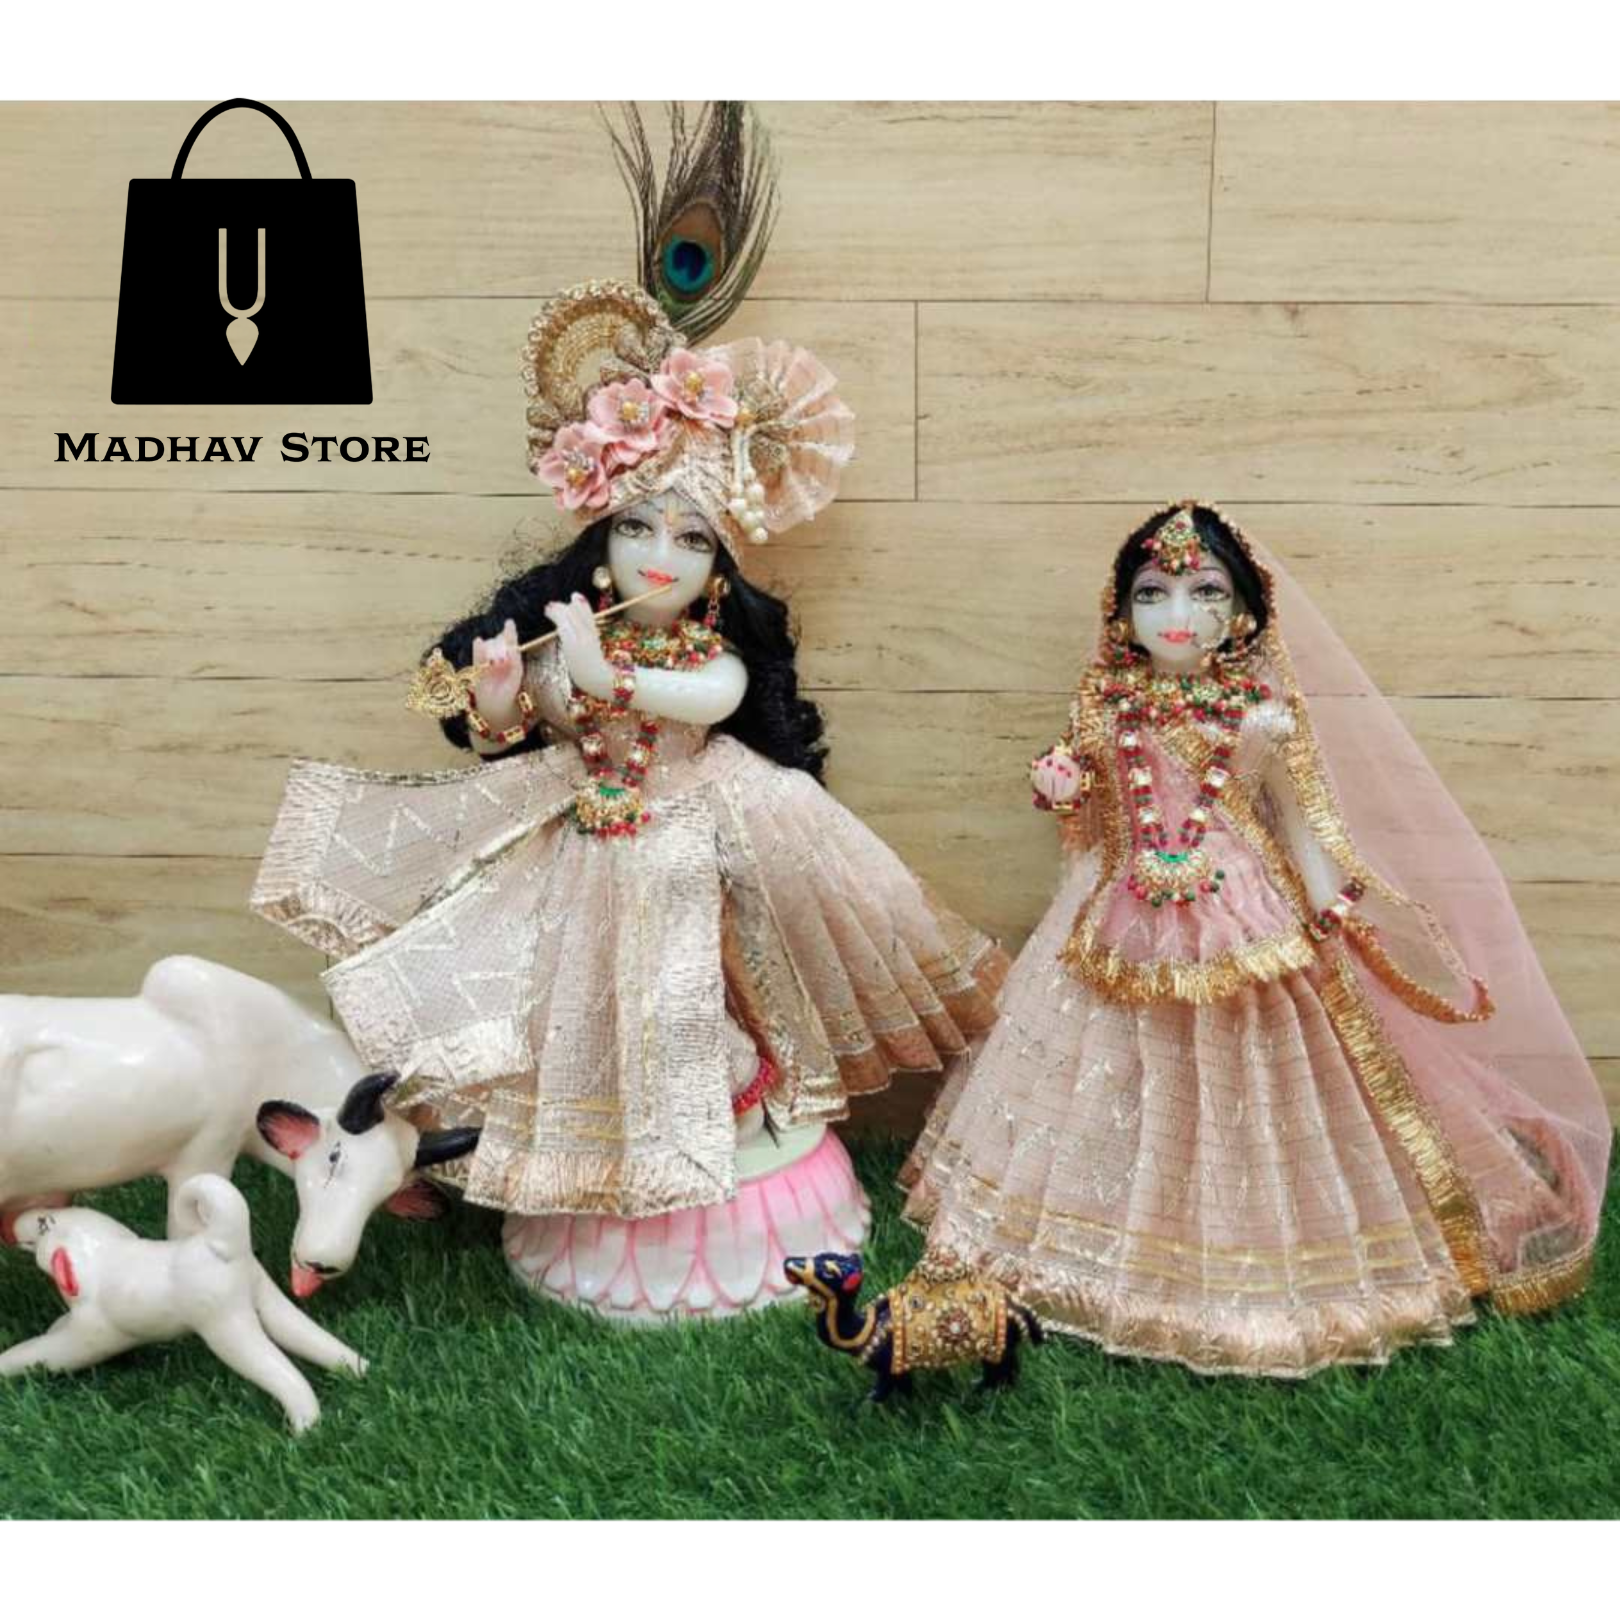 Celebrate Holi in style with this budget-friendly white Radha Krishna dress  - perfect for playing with colors and embracing the spirit o... | Instagram